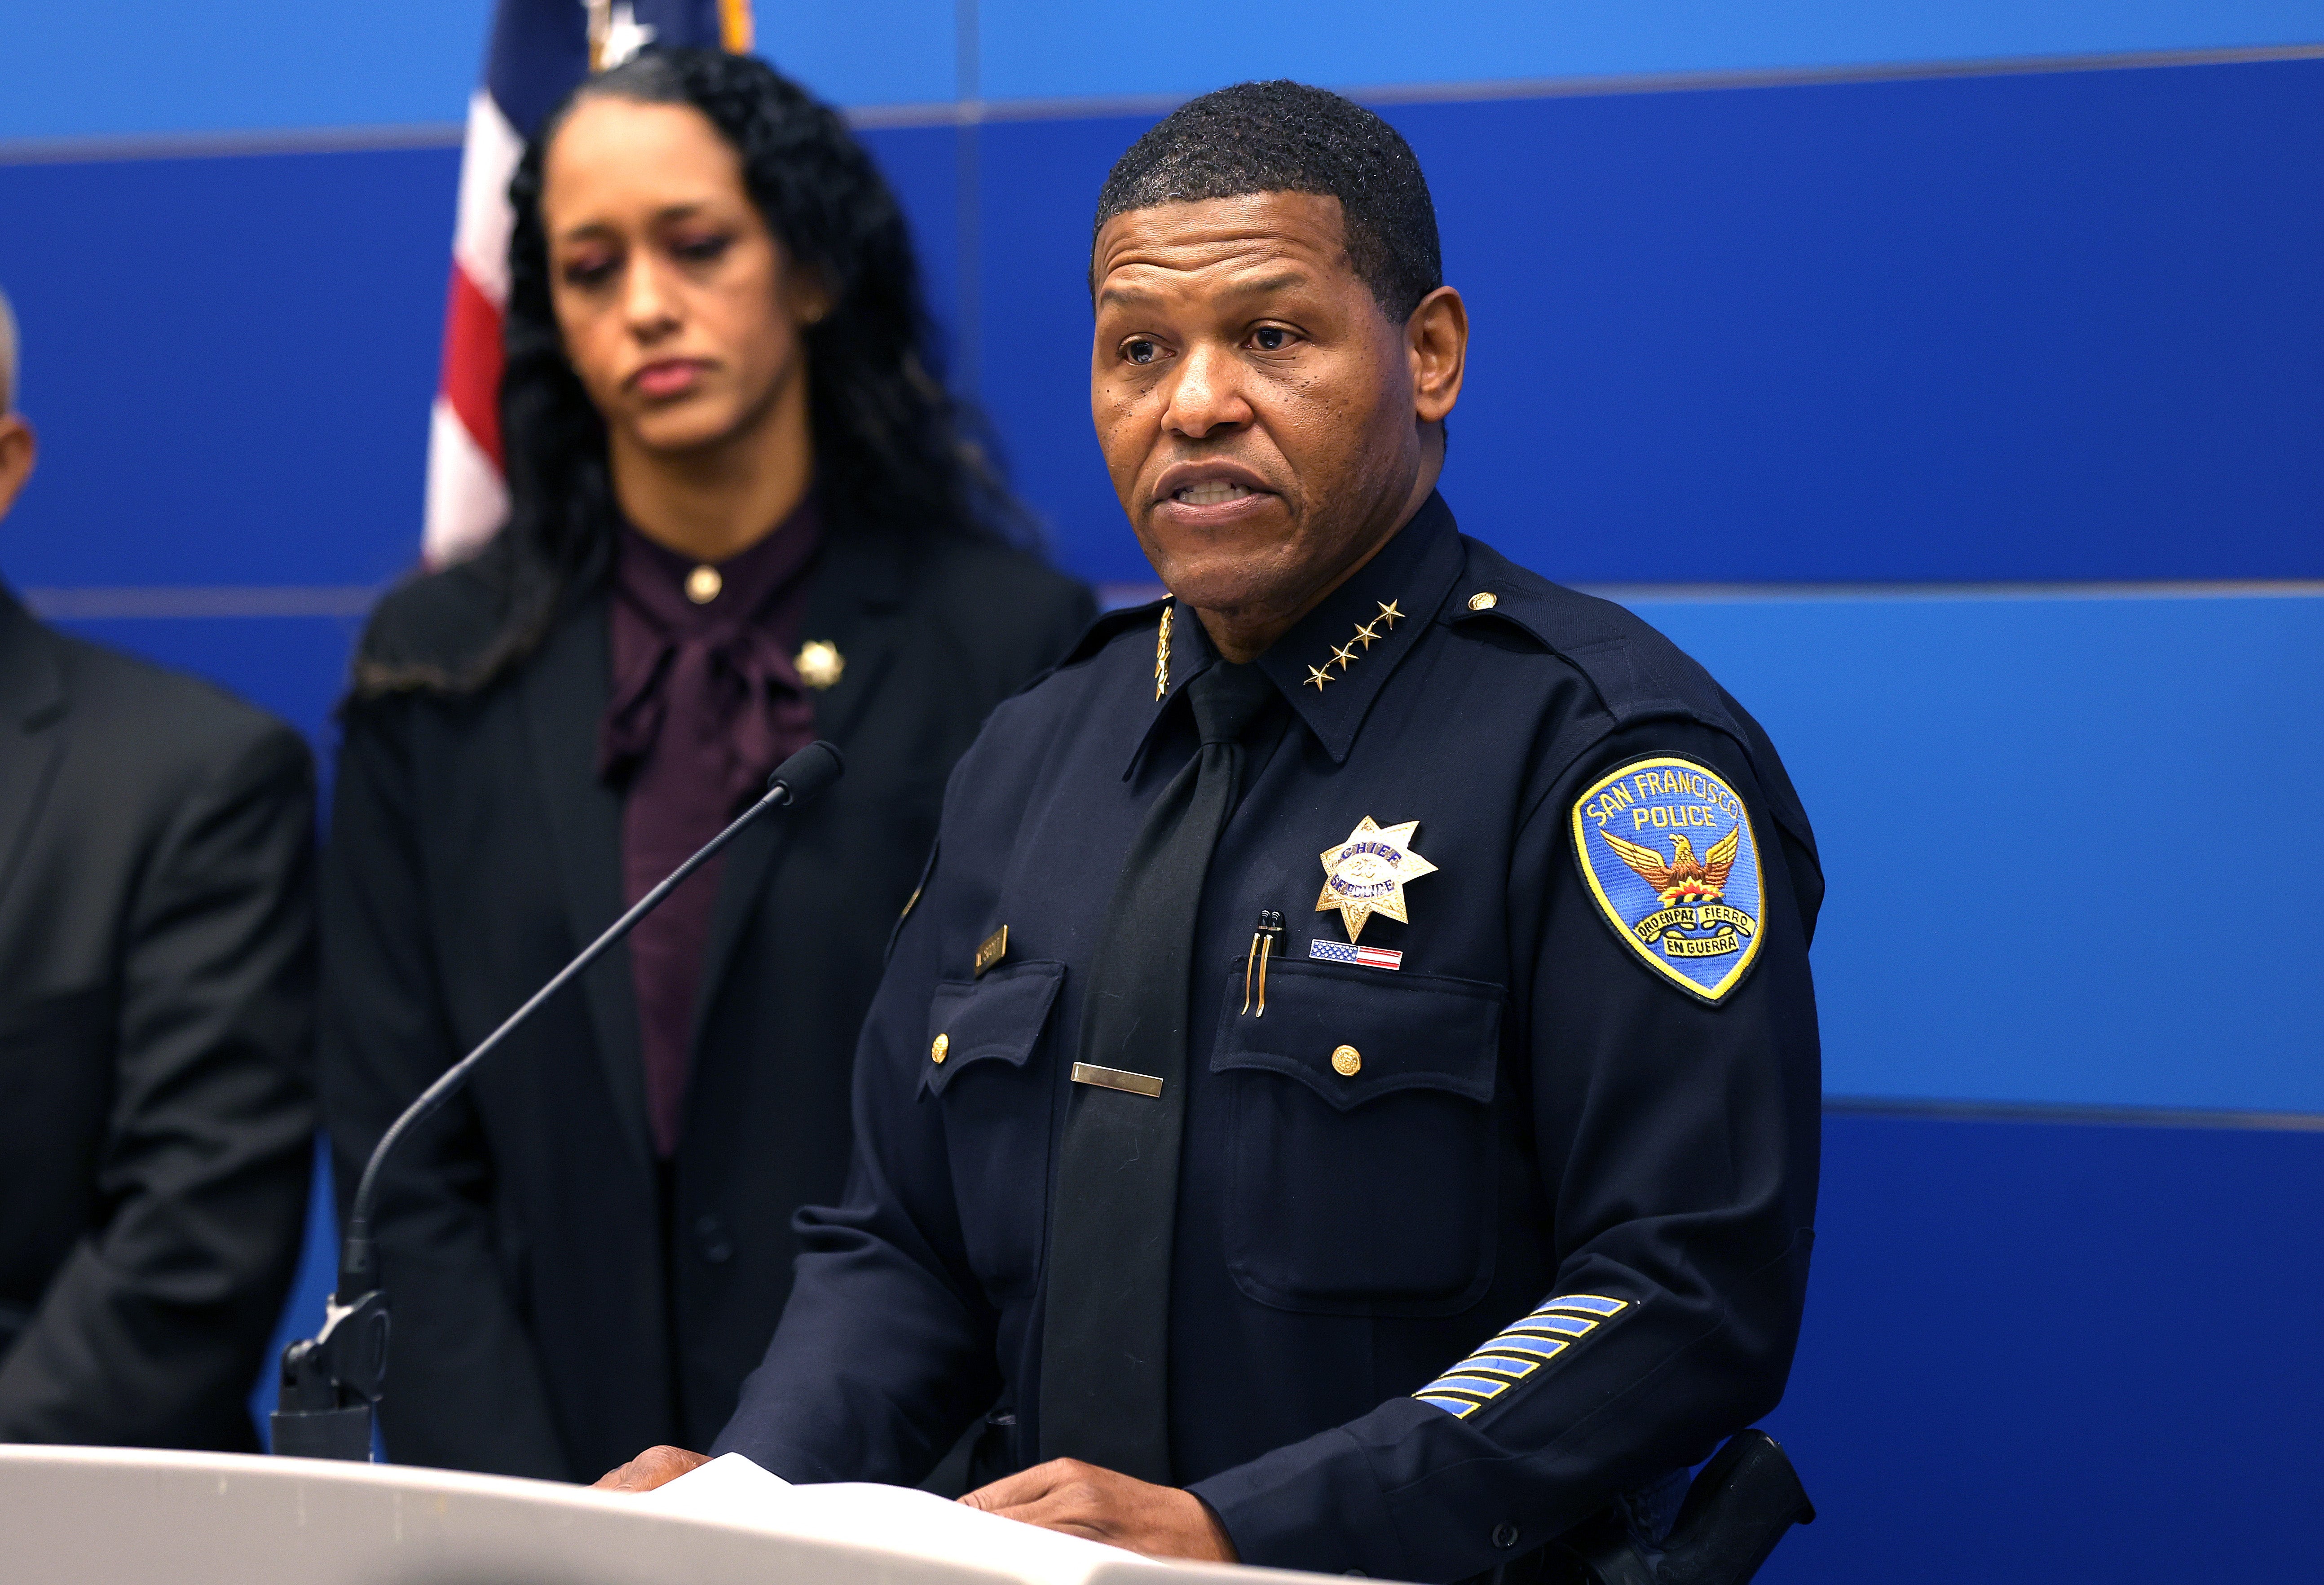 Police chief William Scott and district attorney Brooke Jenkins at a press conference to discuss the attack on Paul Pelosi